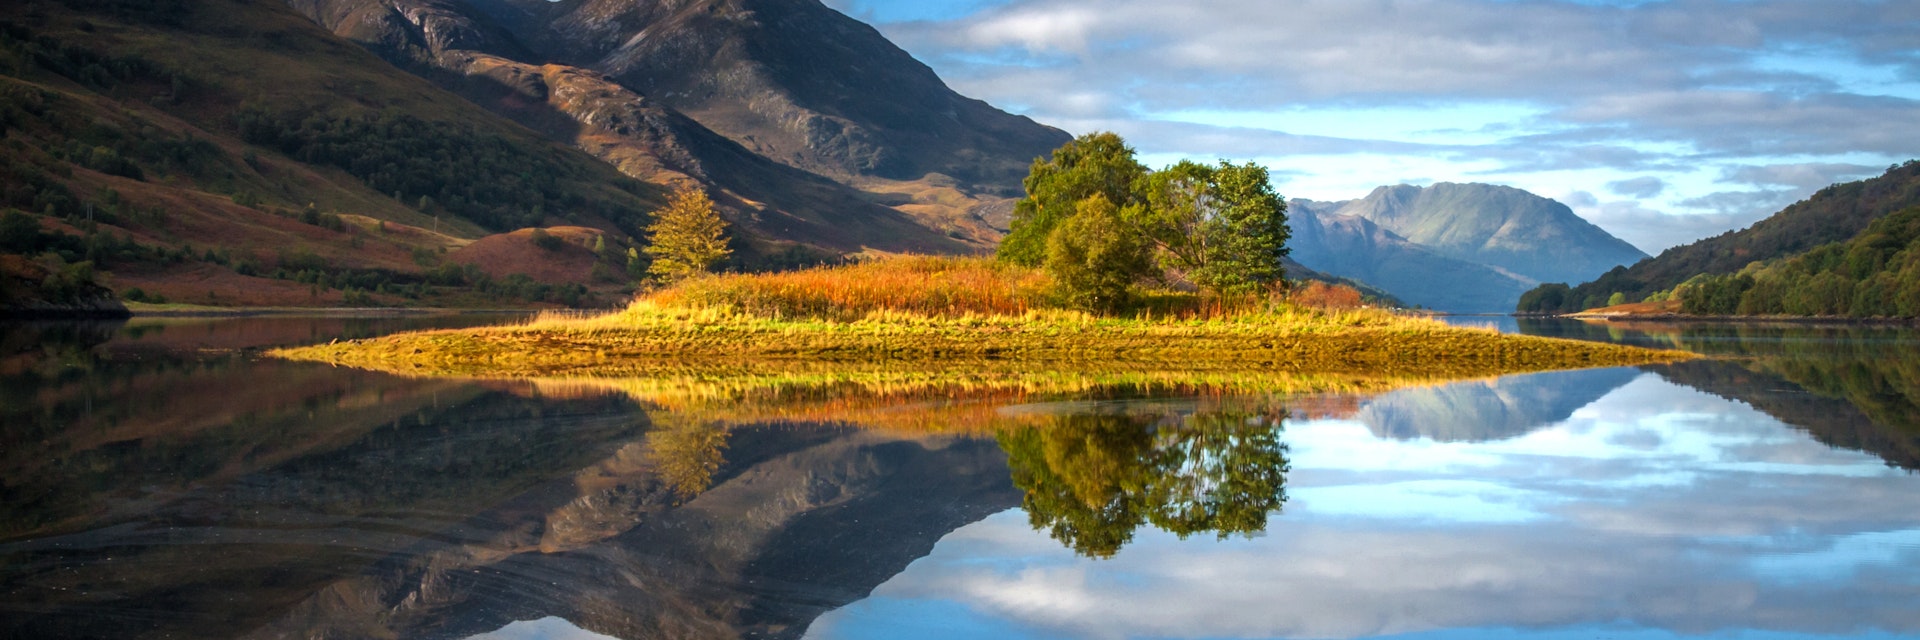 Reflections of the island in Loch Leven, Scotland, with the Pap of Glencoe in the middle distance.